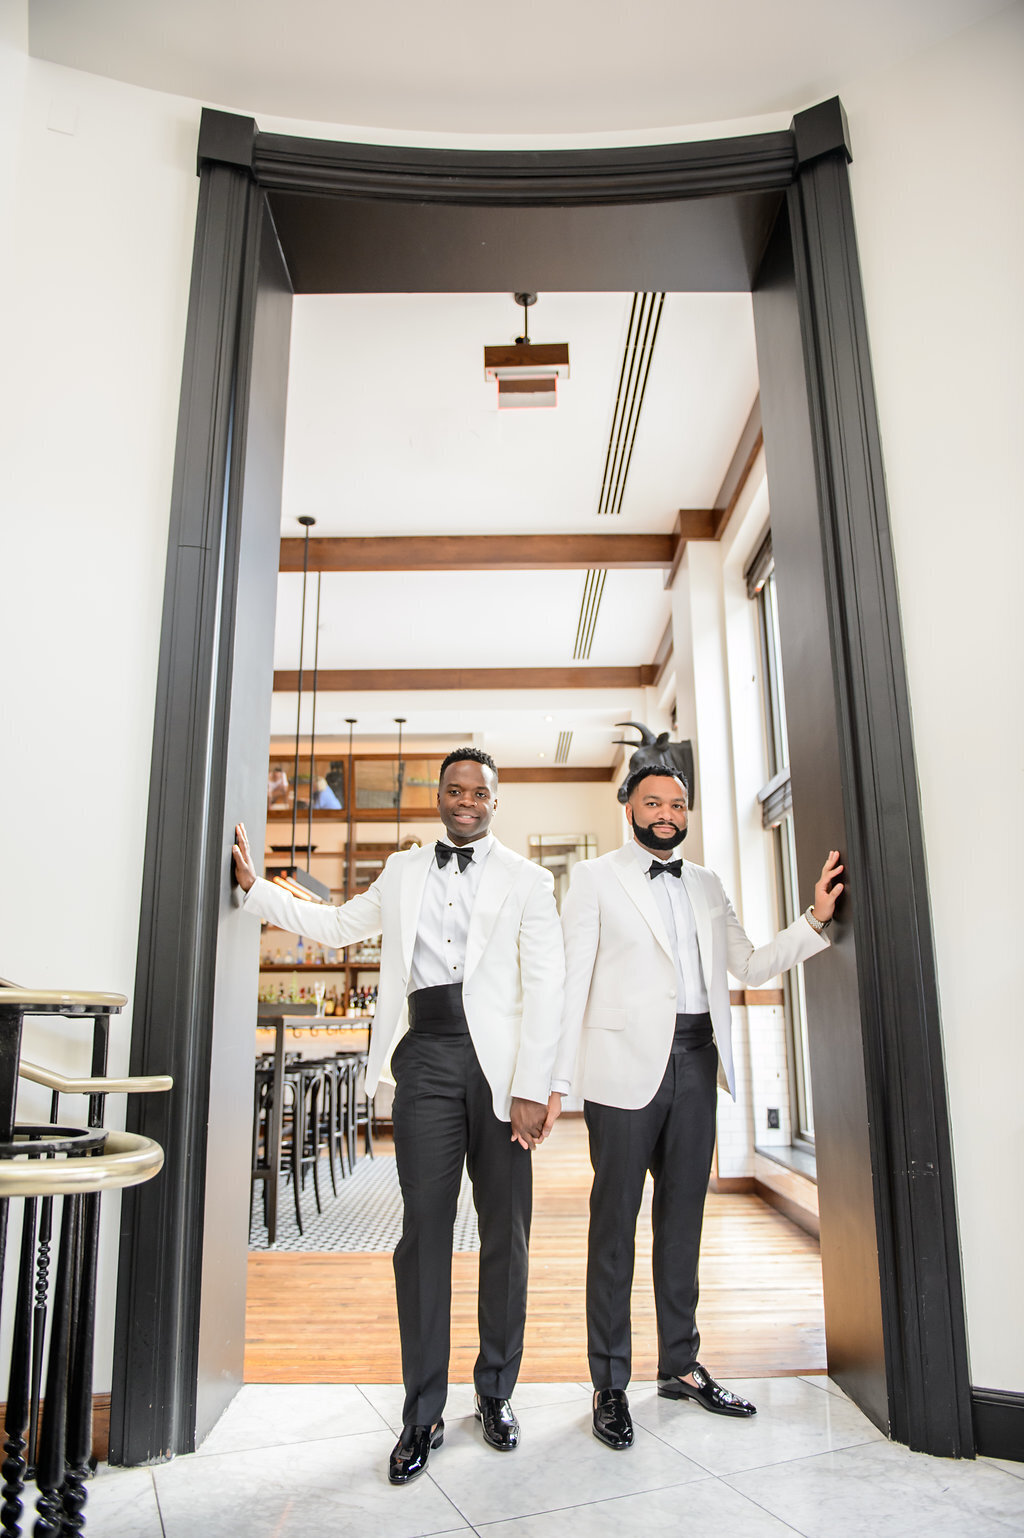 Grooms-In-White-Suits-for-Wedding-Creating-Joy-Events-Co